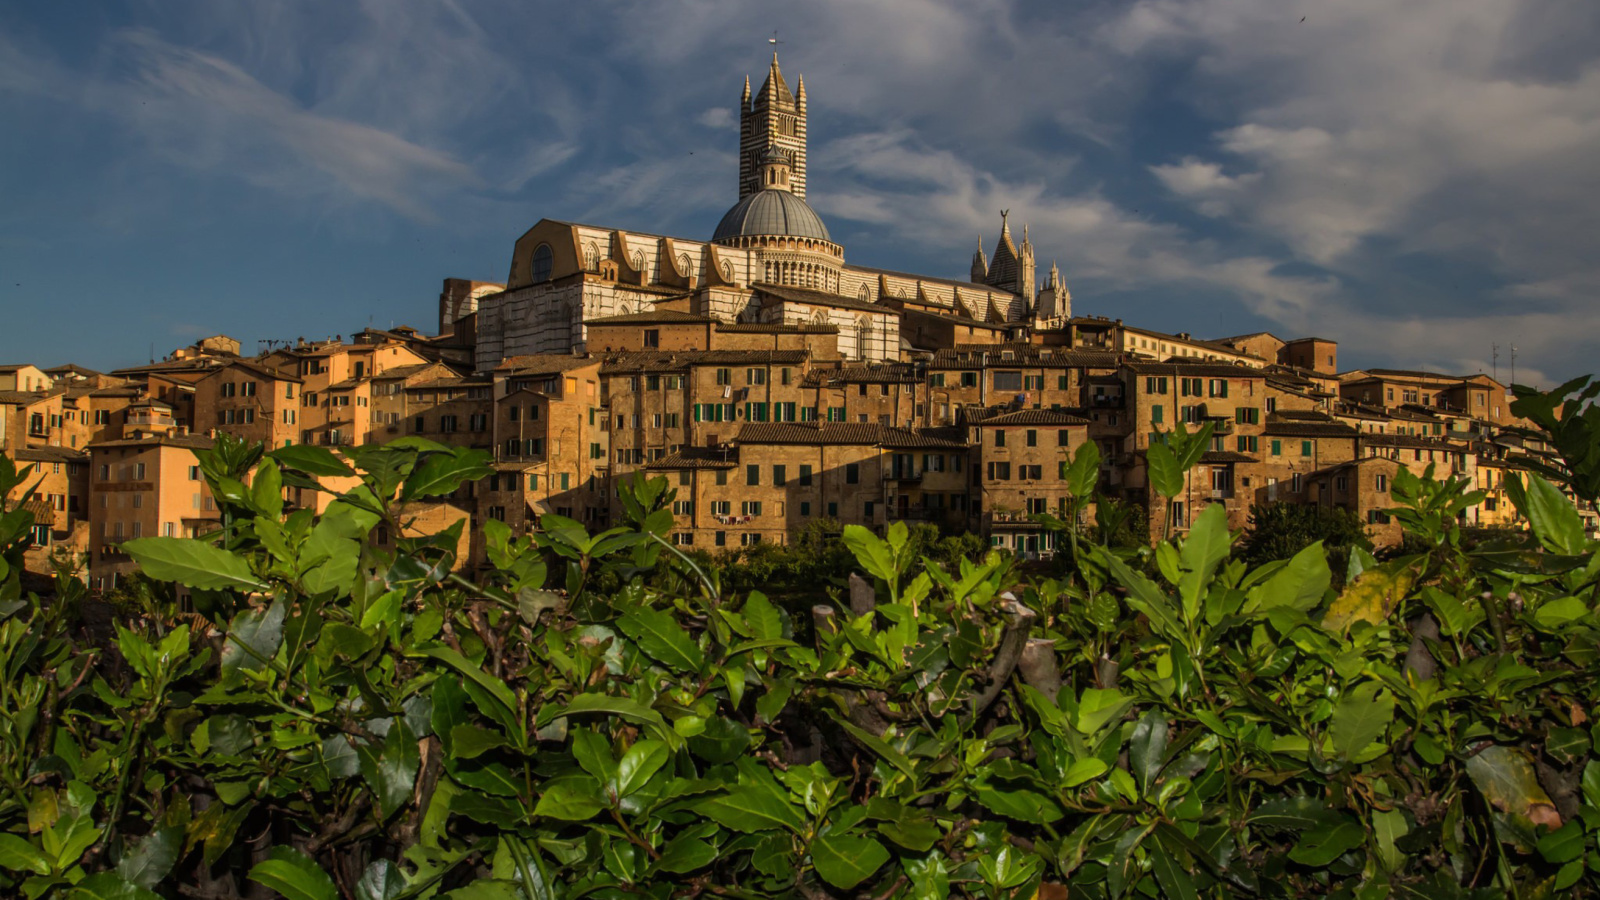 Cathedral of Siena wallpaper 1600x900